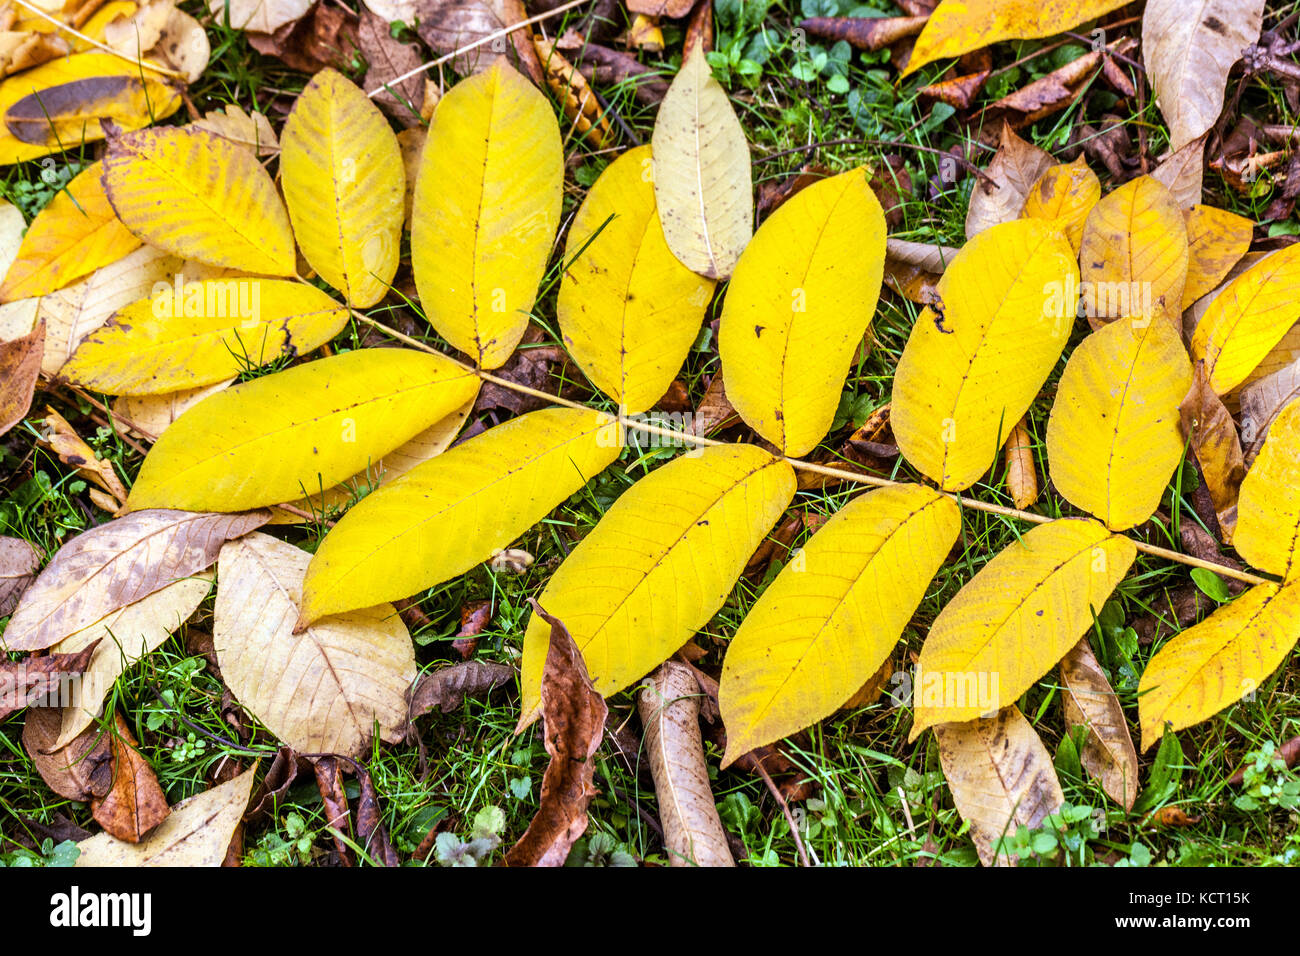 Juglans cathayensis, Chinese Walnut, yellow autumn fallen leaves pinnate leaf on the ground Stock Photo